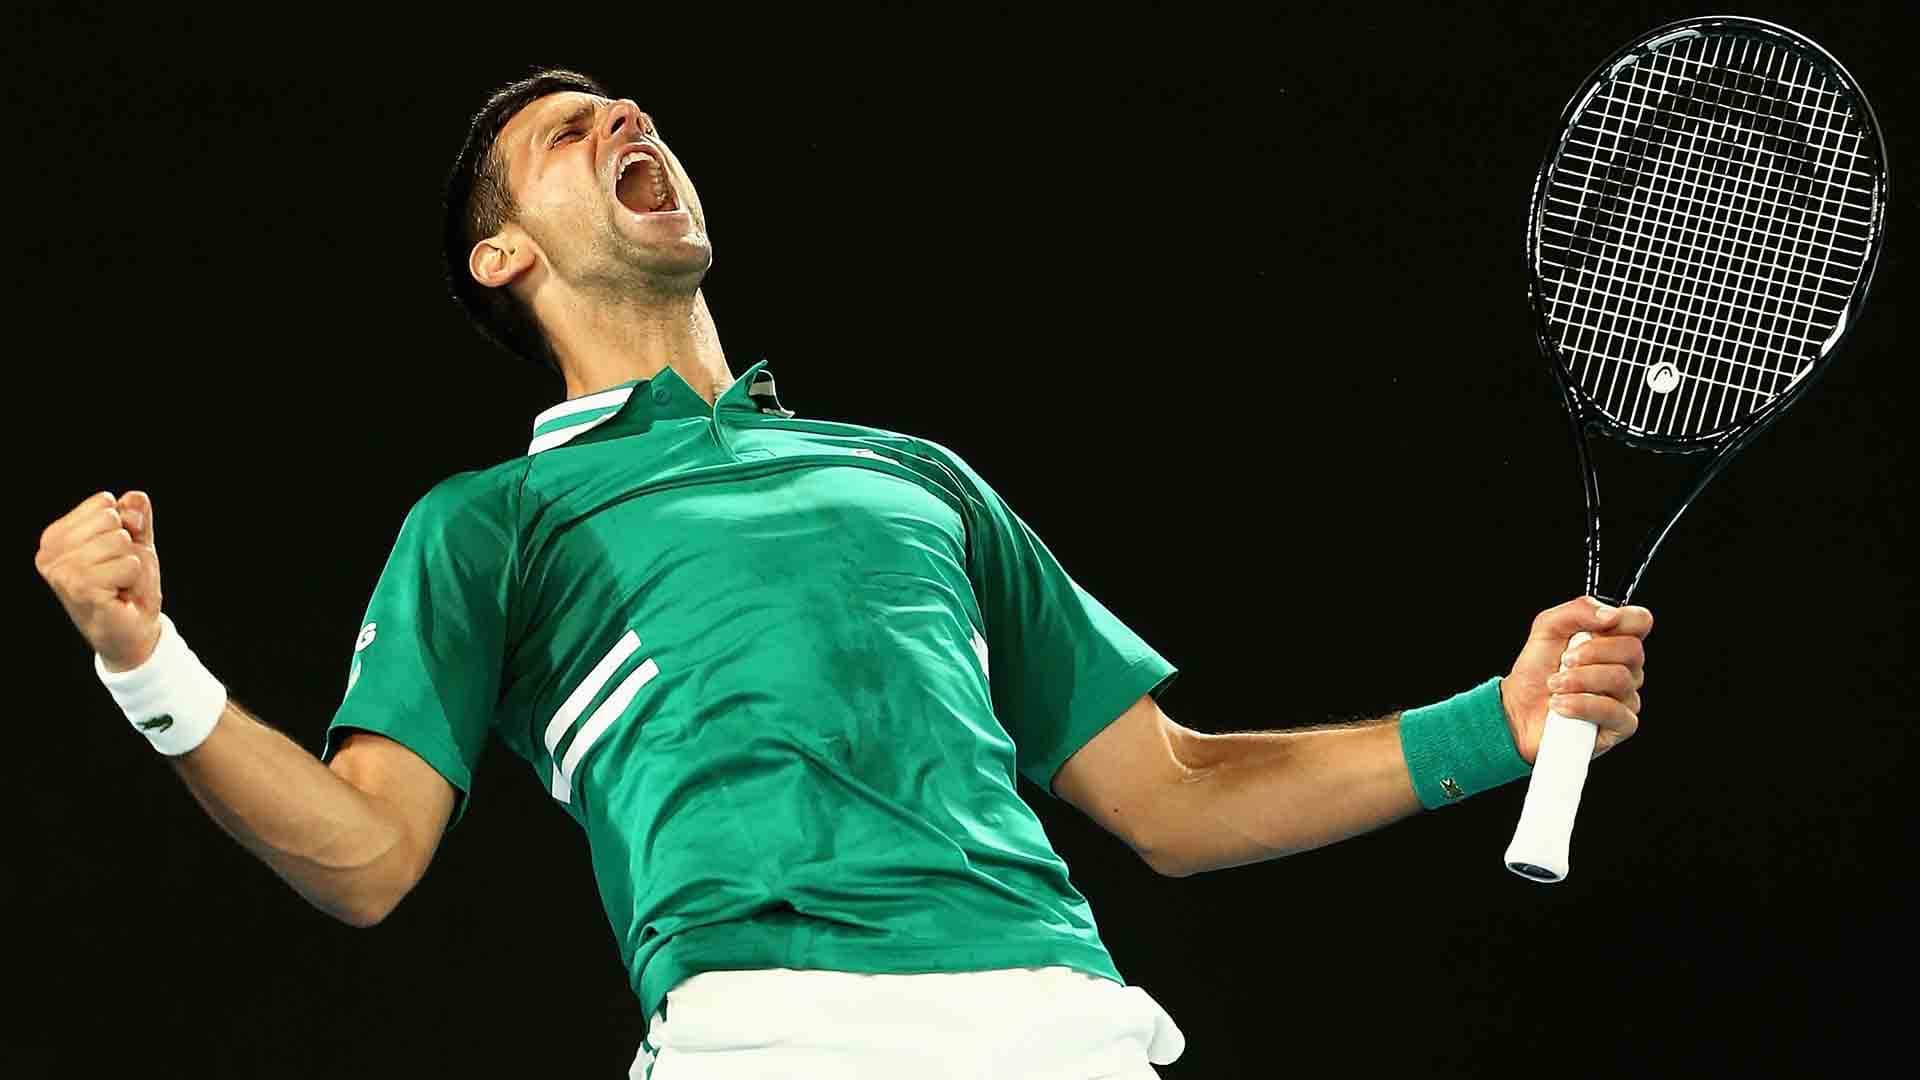 <a href='https://www.atptour.com/en/players/novak-djokovic/d643/overview'>Novak Djokovic</a> defeats <a href='https://www.atptour.com/en/players/taylor-fritz/fb98/overview'>Taylor Fritz</a> in five sets to reach the <a href='https://www.atptour.com/en/tournaments/australian-open/580/overview'>Australian Open</a> Round of 16 on Friday.